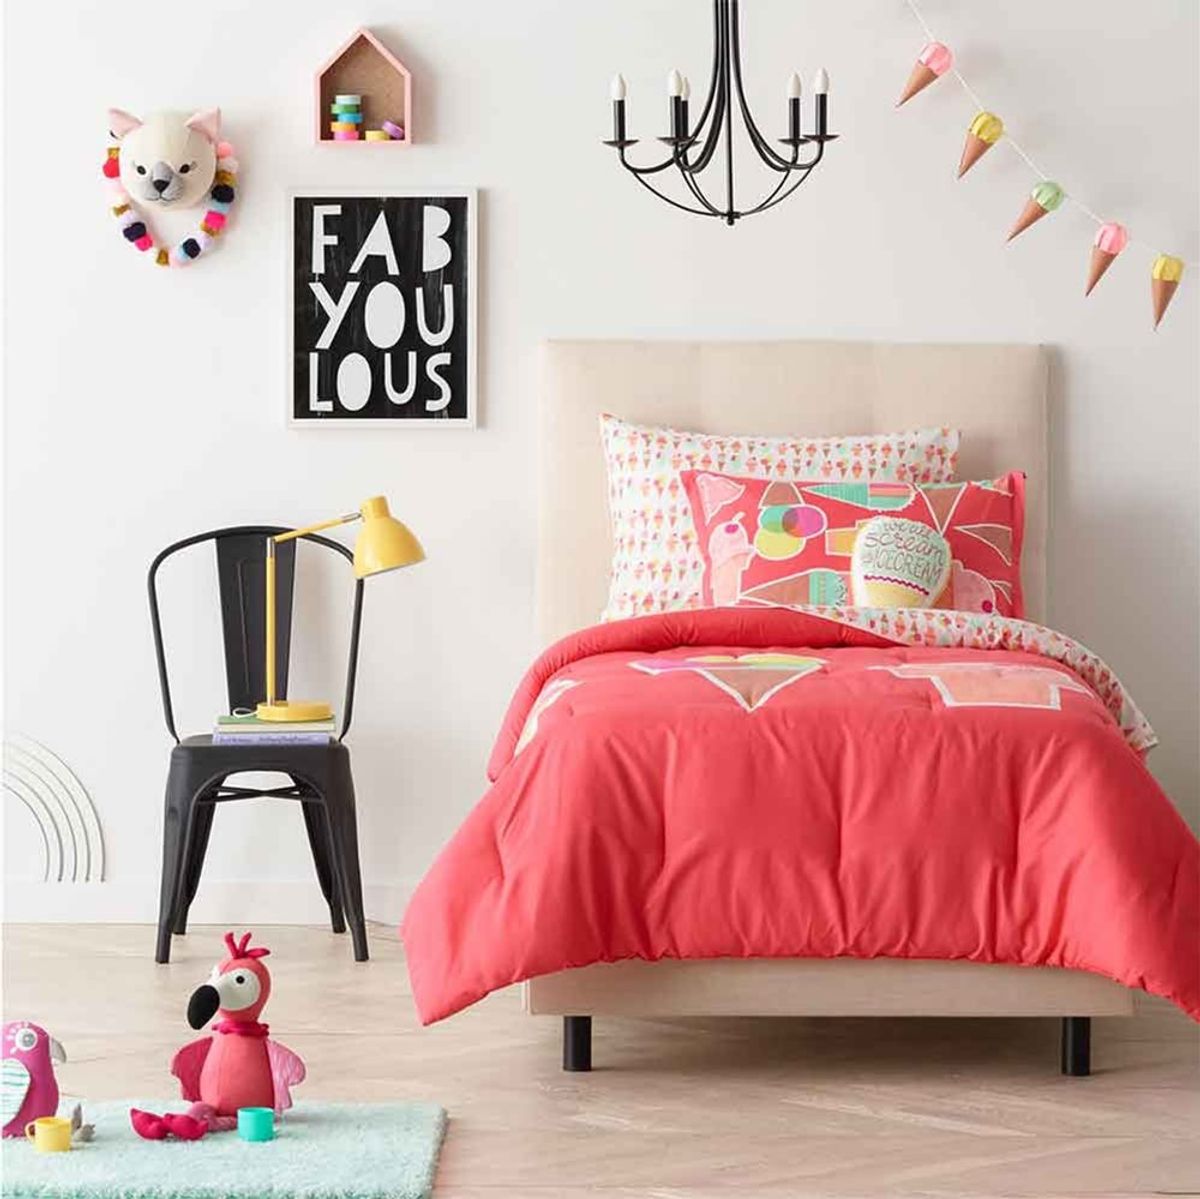 Target’s New Gender-Neutral Kids’ Decor Line Might Be the Most Covetable Collection of Spring